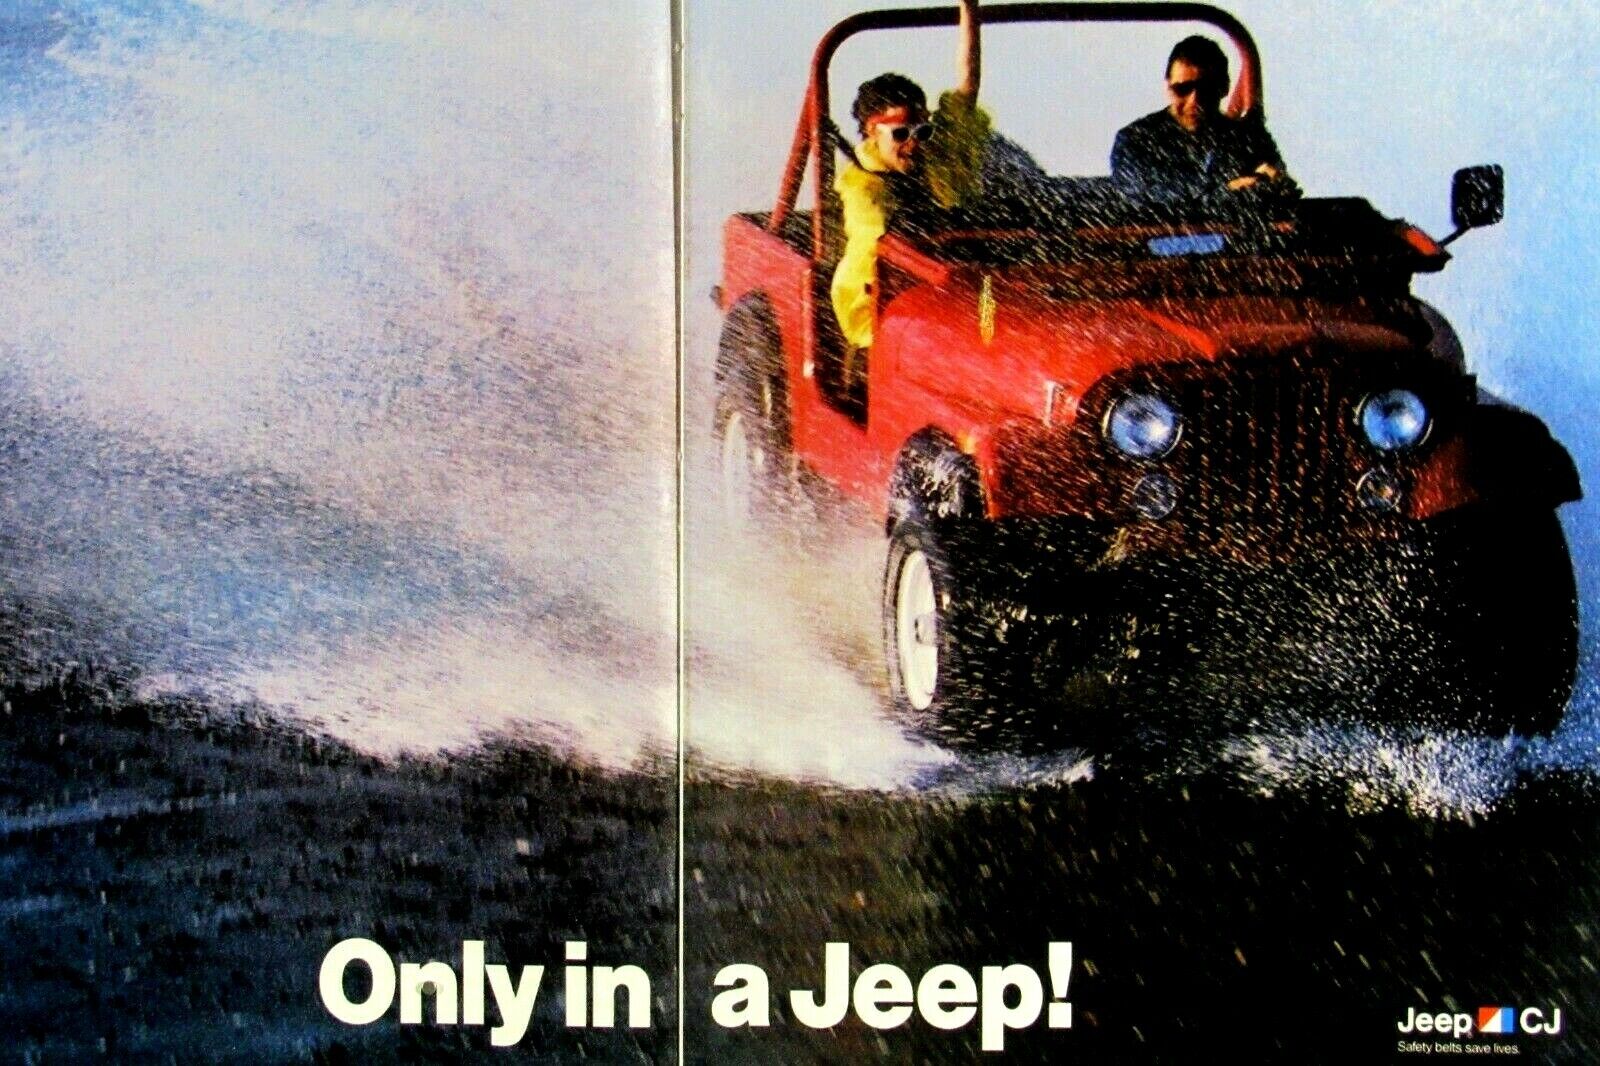 1984 Jeep Wrangler CJ Vintage Only In A Jeep Original Print Ad 8.5 x 11\